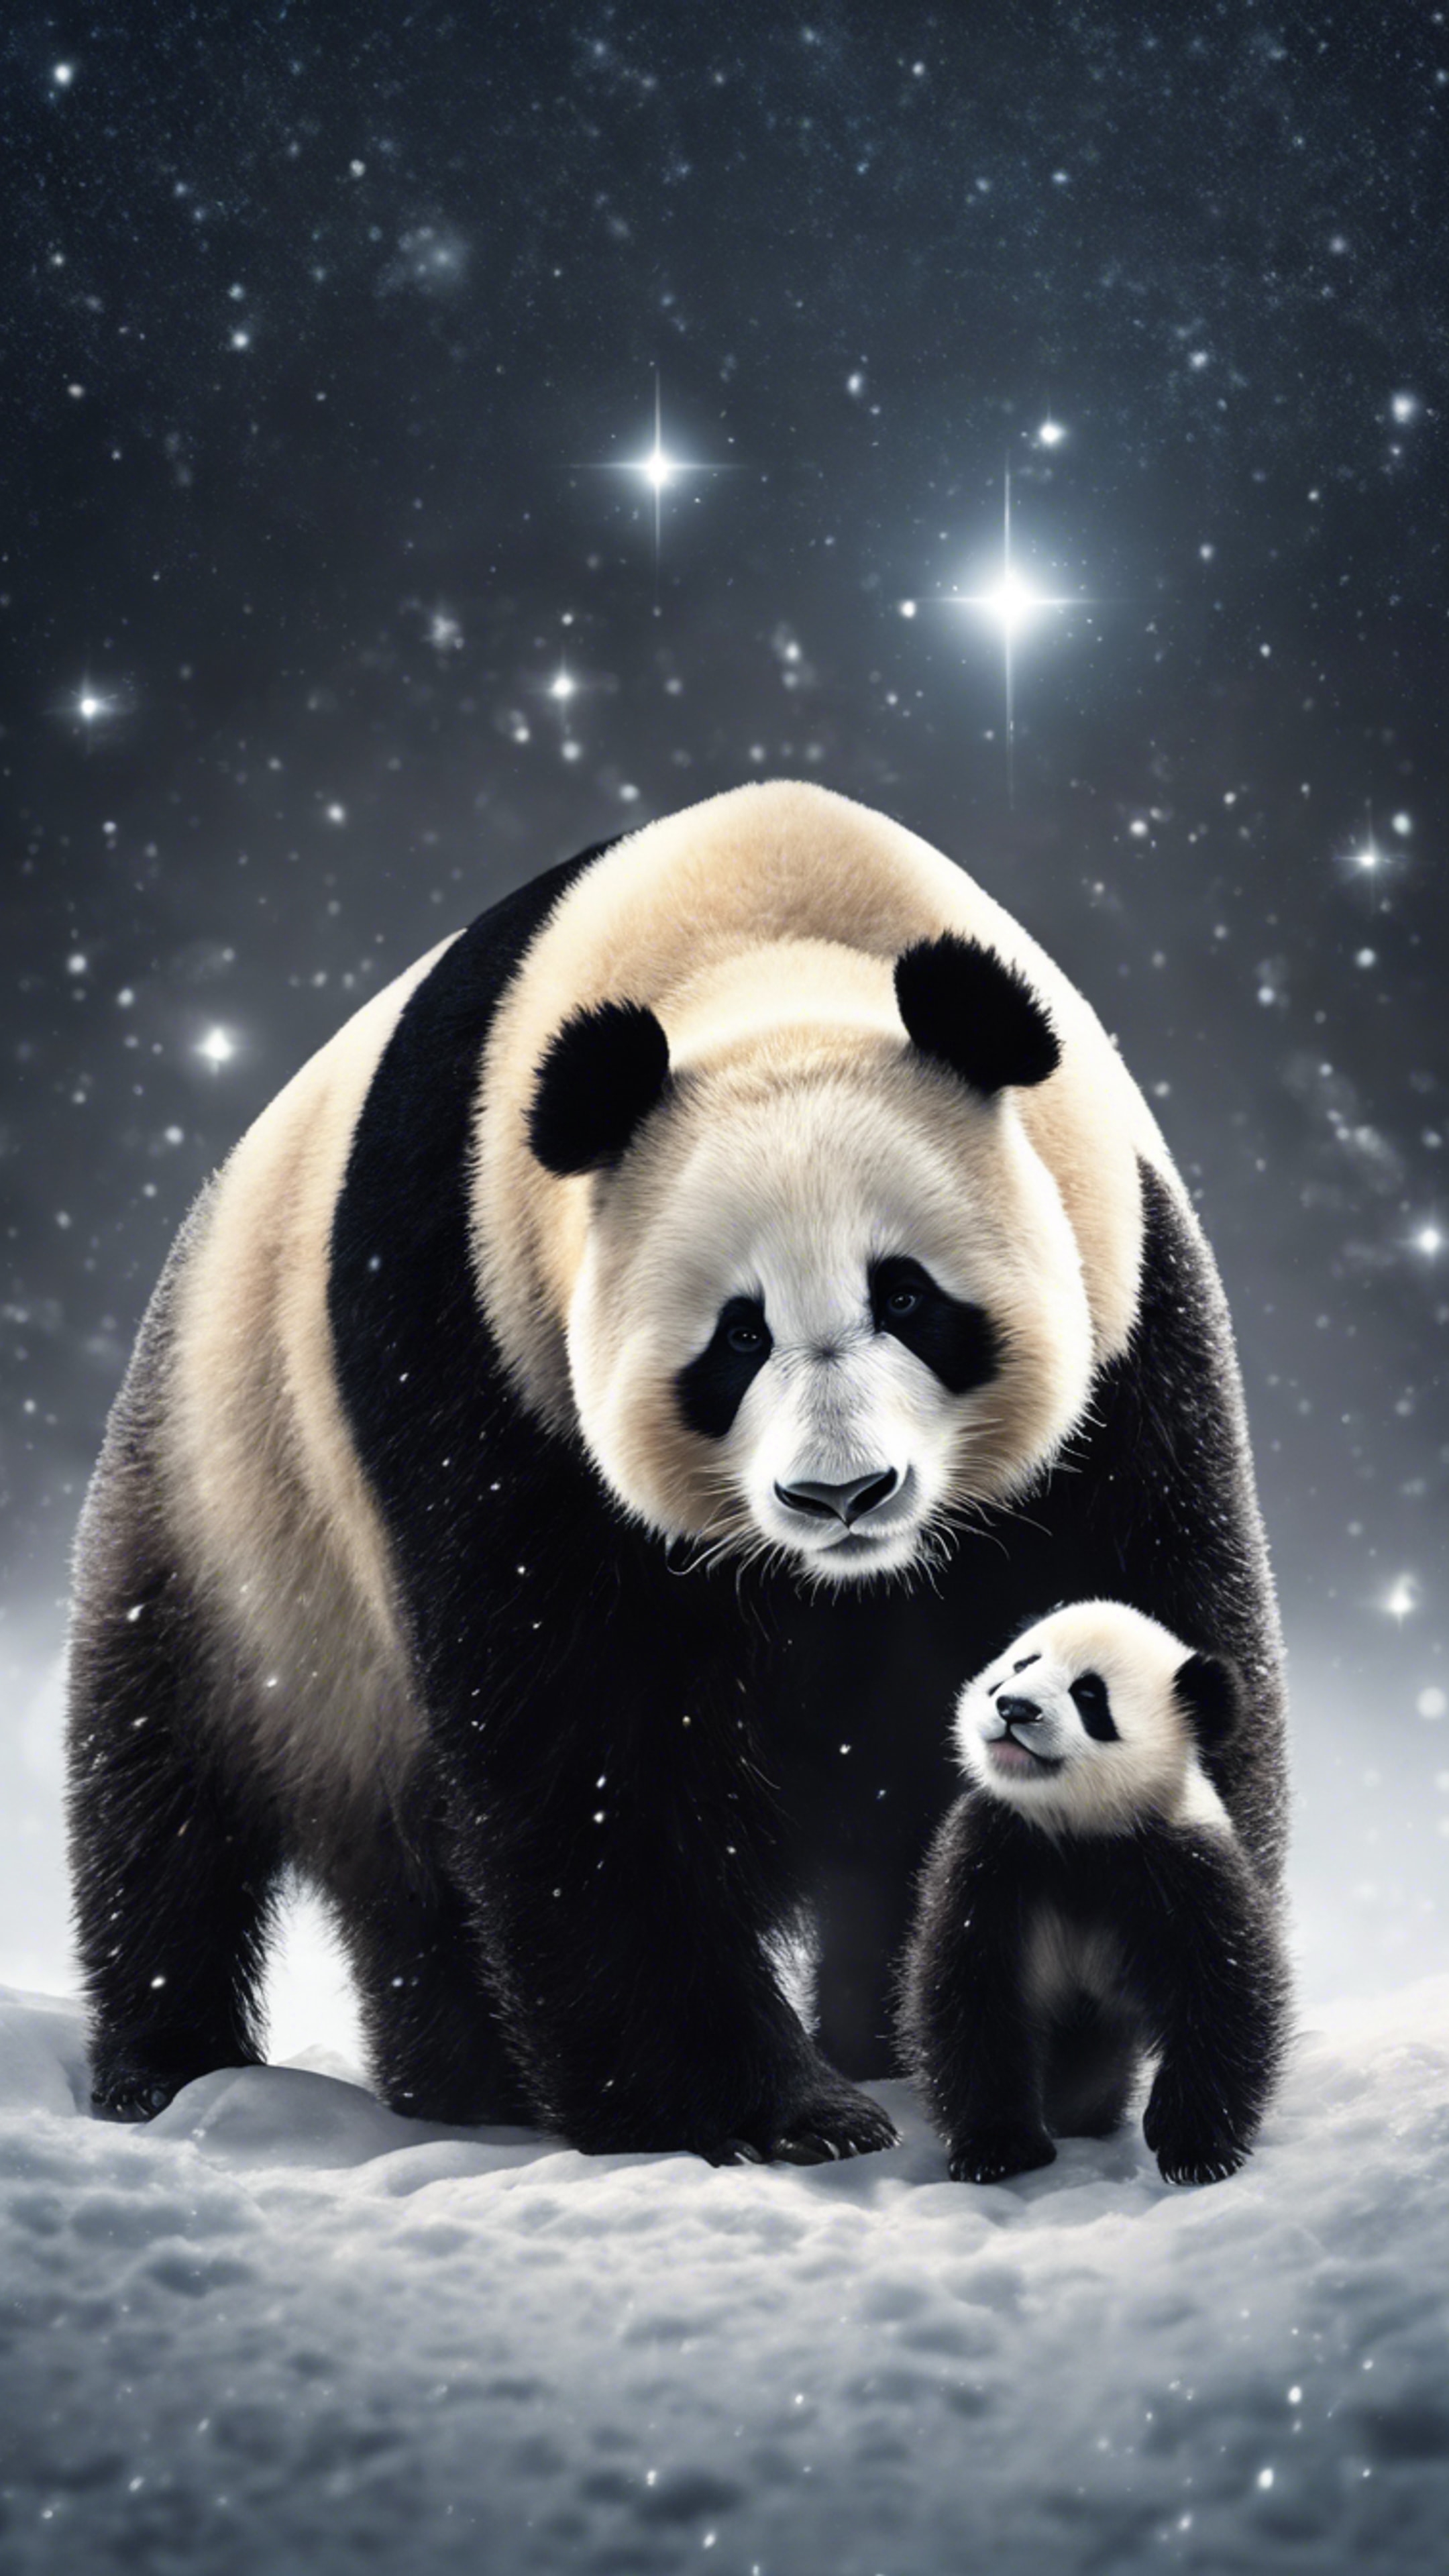 A mother panda with her cubs, peacefully taking a stroll on a silent, snowy night under a blanket of stars. Hình nền[875b5ef660eb48ddb691]